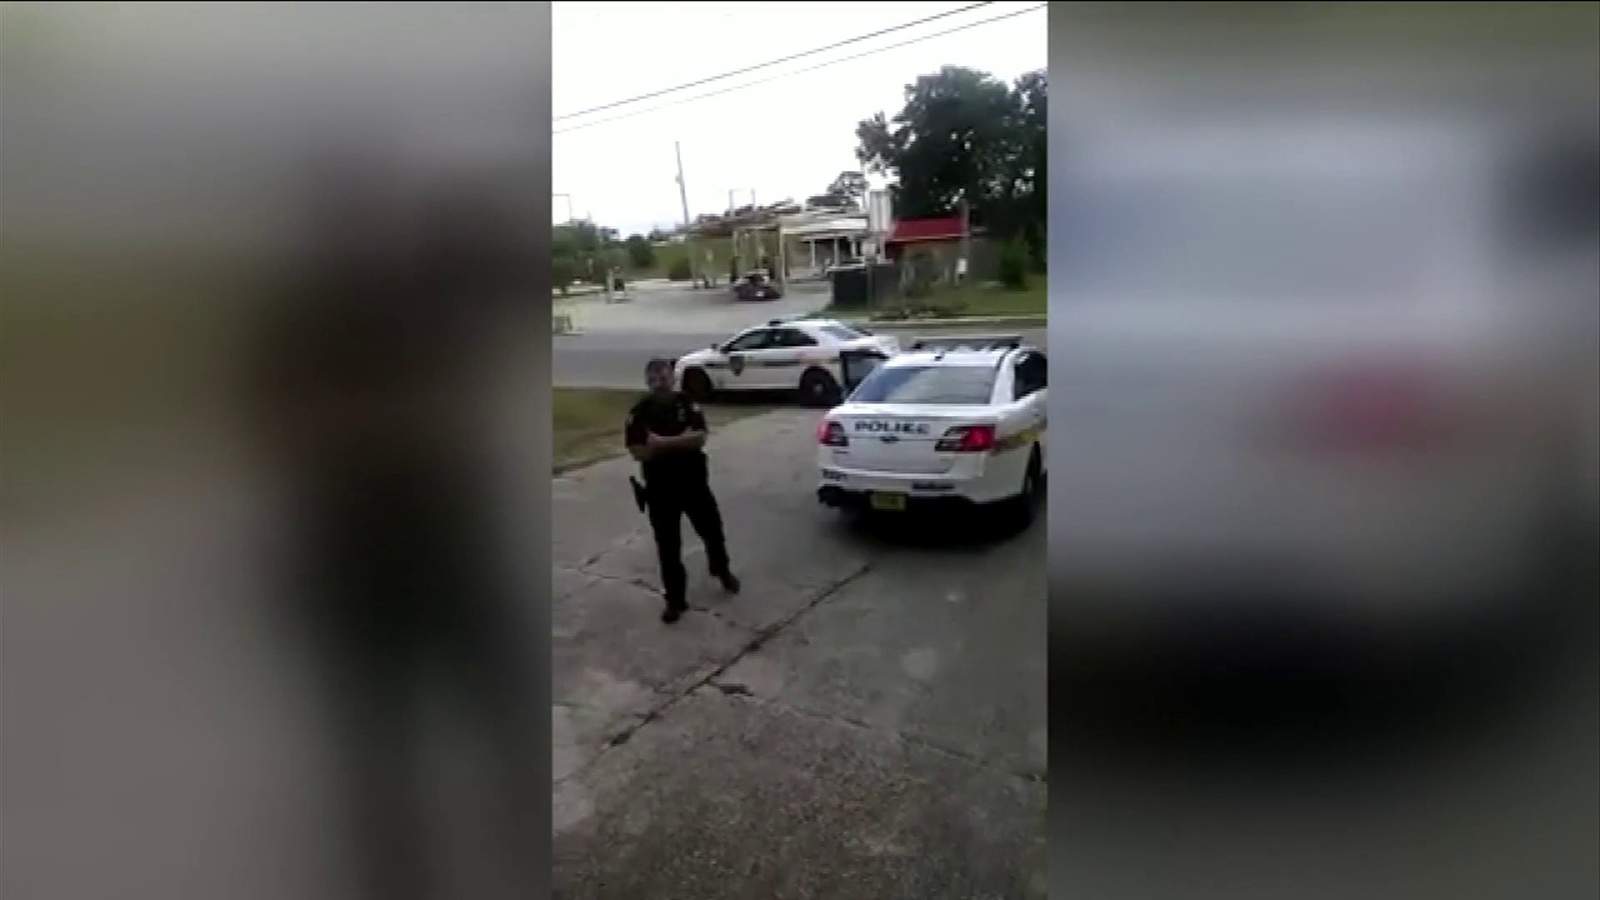 Woman says Jacksonville police entered home without warrant, used excessive force